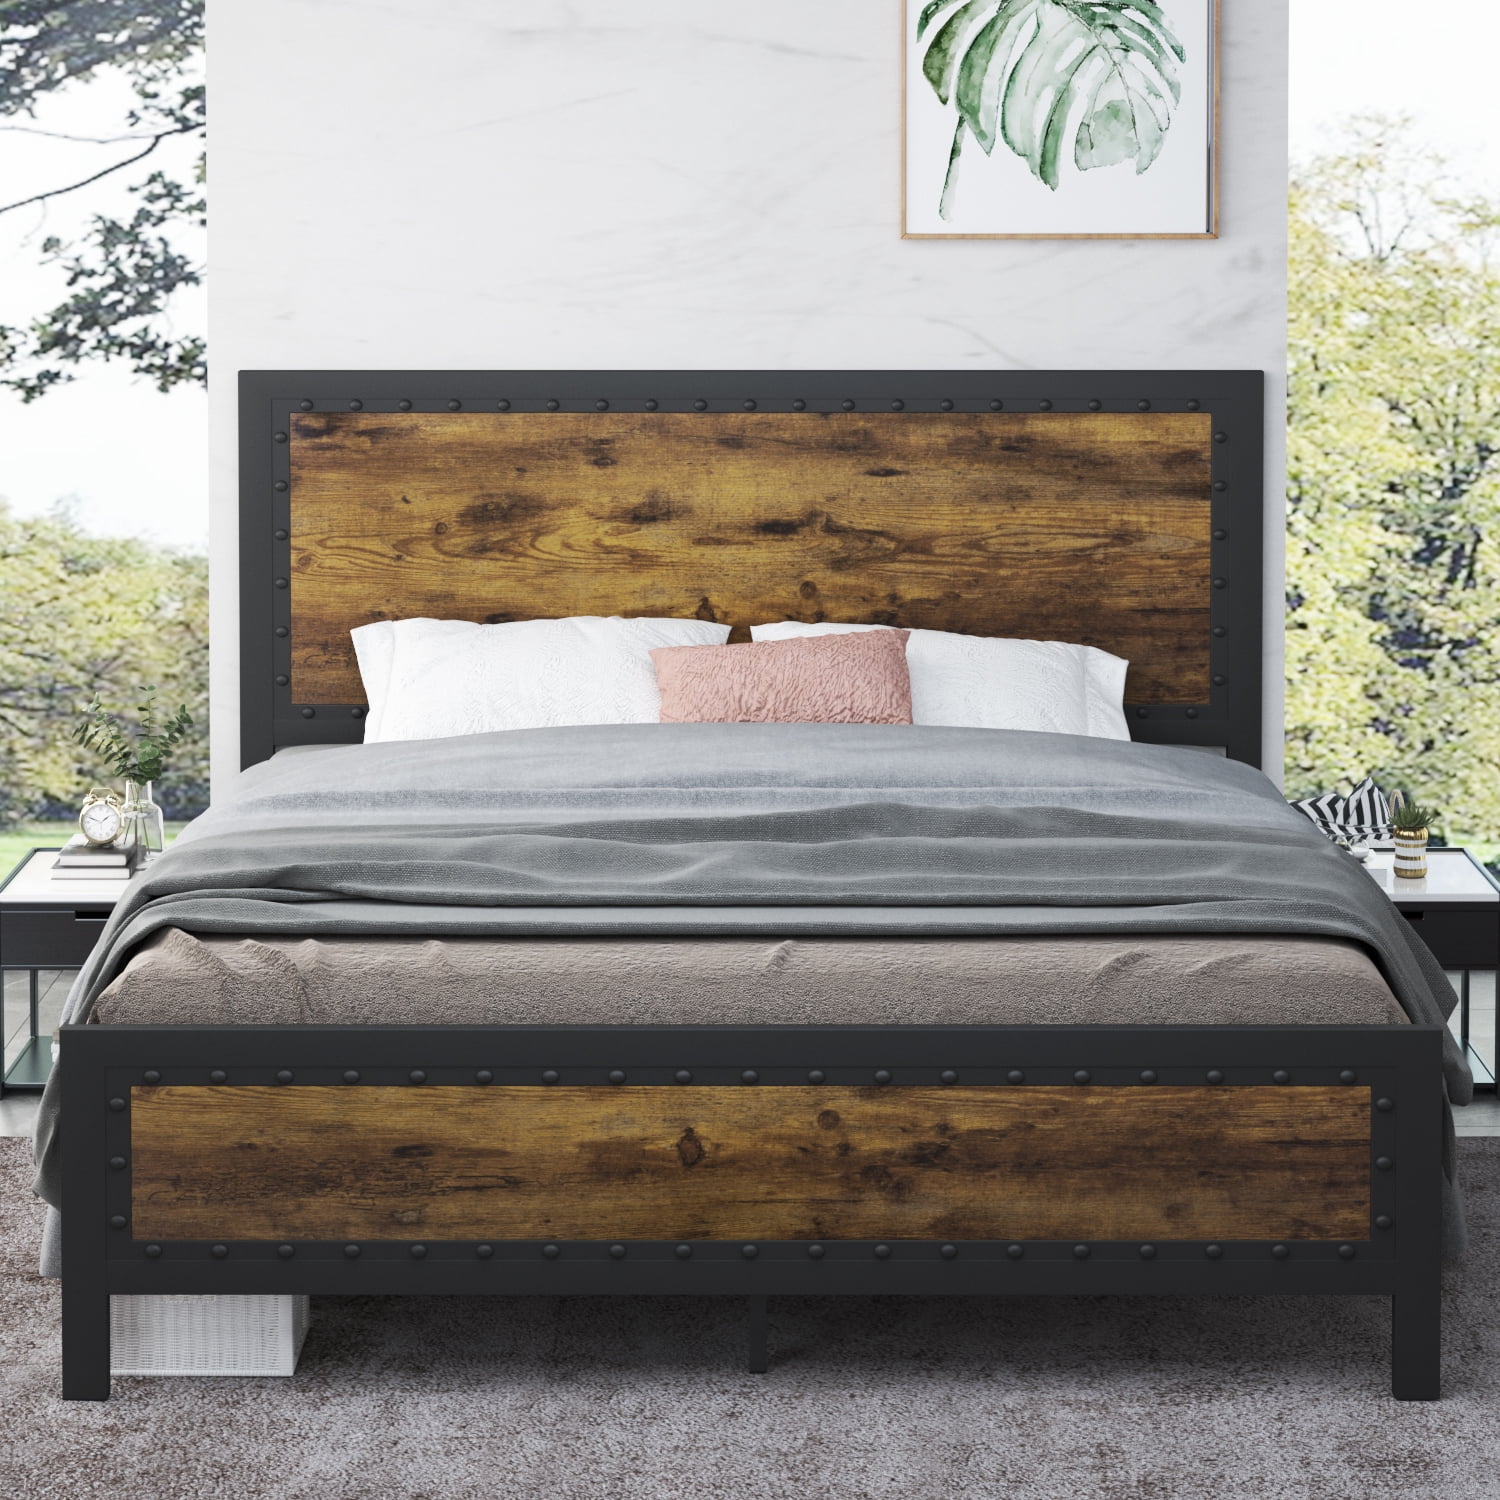 Amolife Full Size Heavy Duty Metal Bed, Wood Around Metal Bed Frame